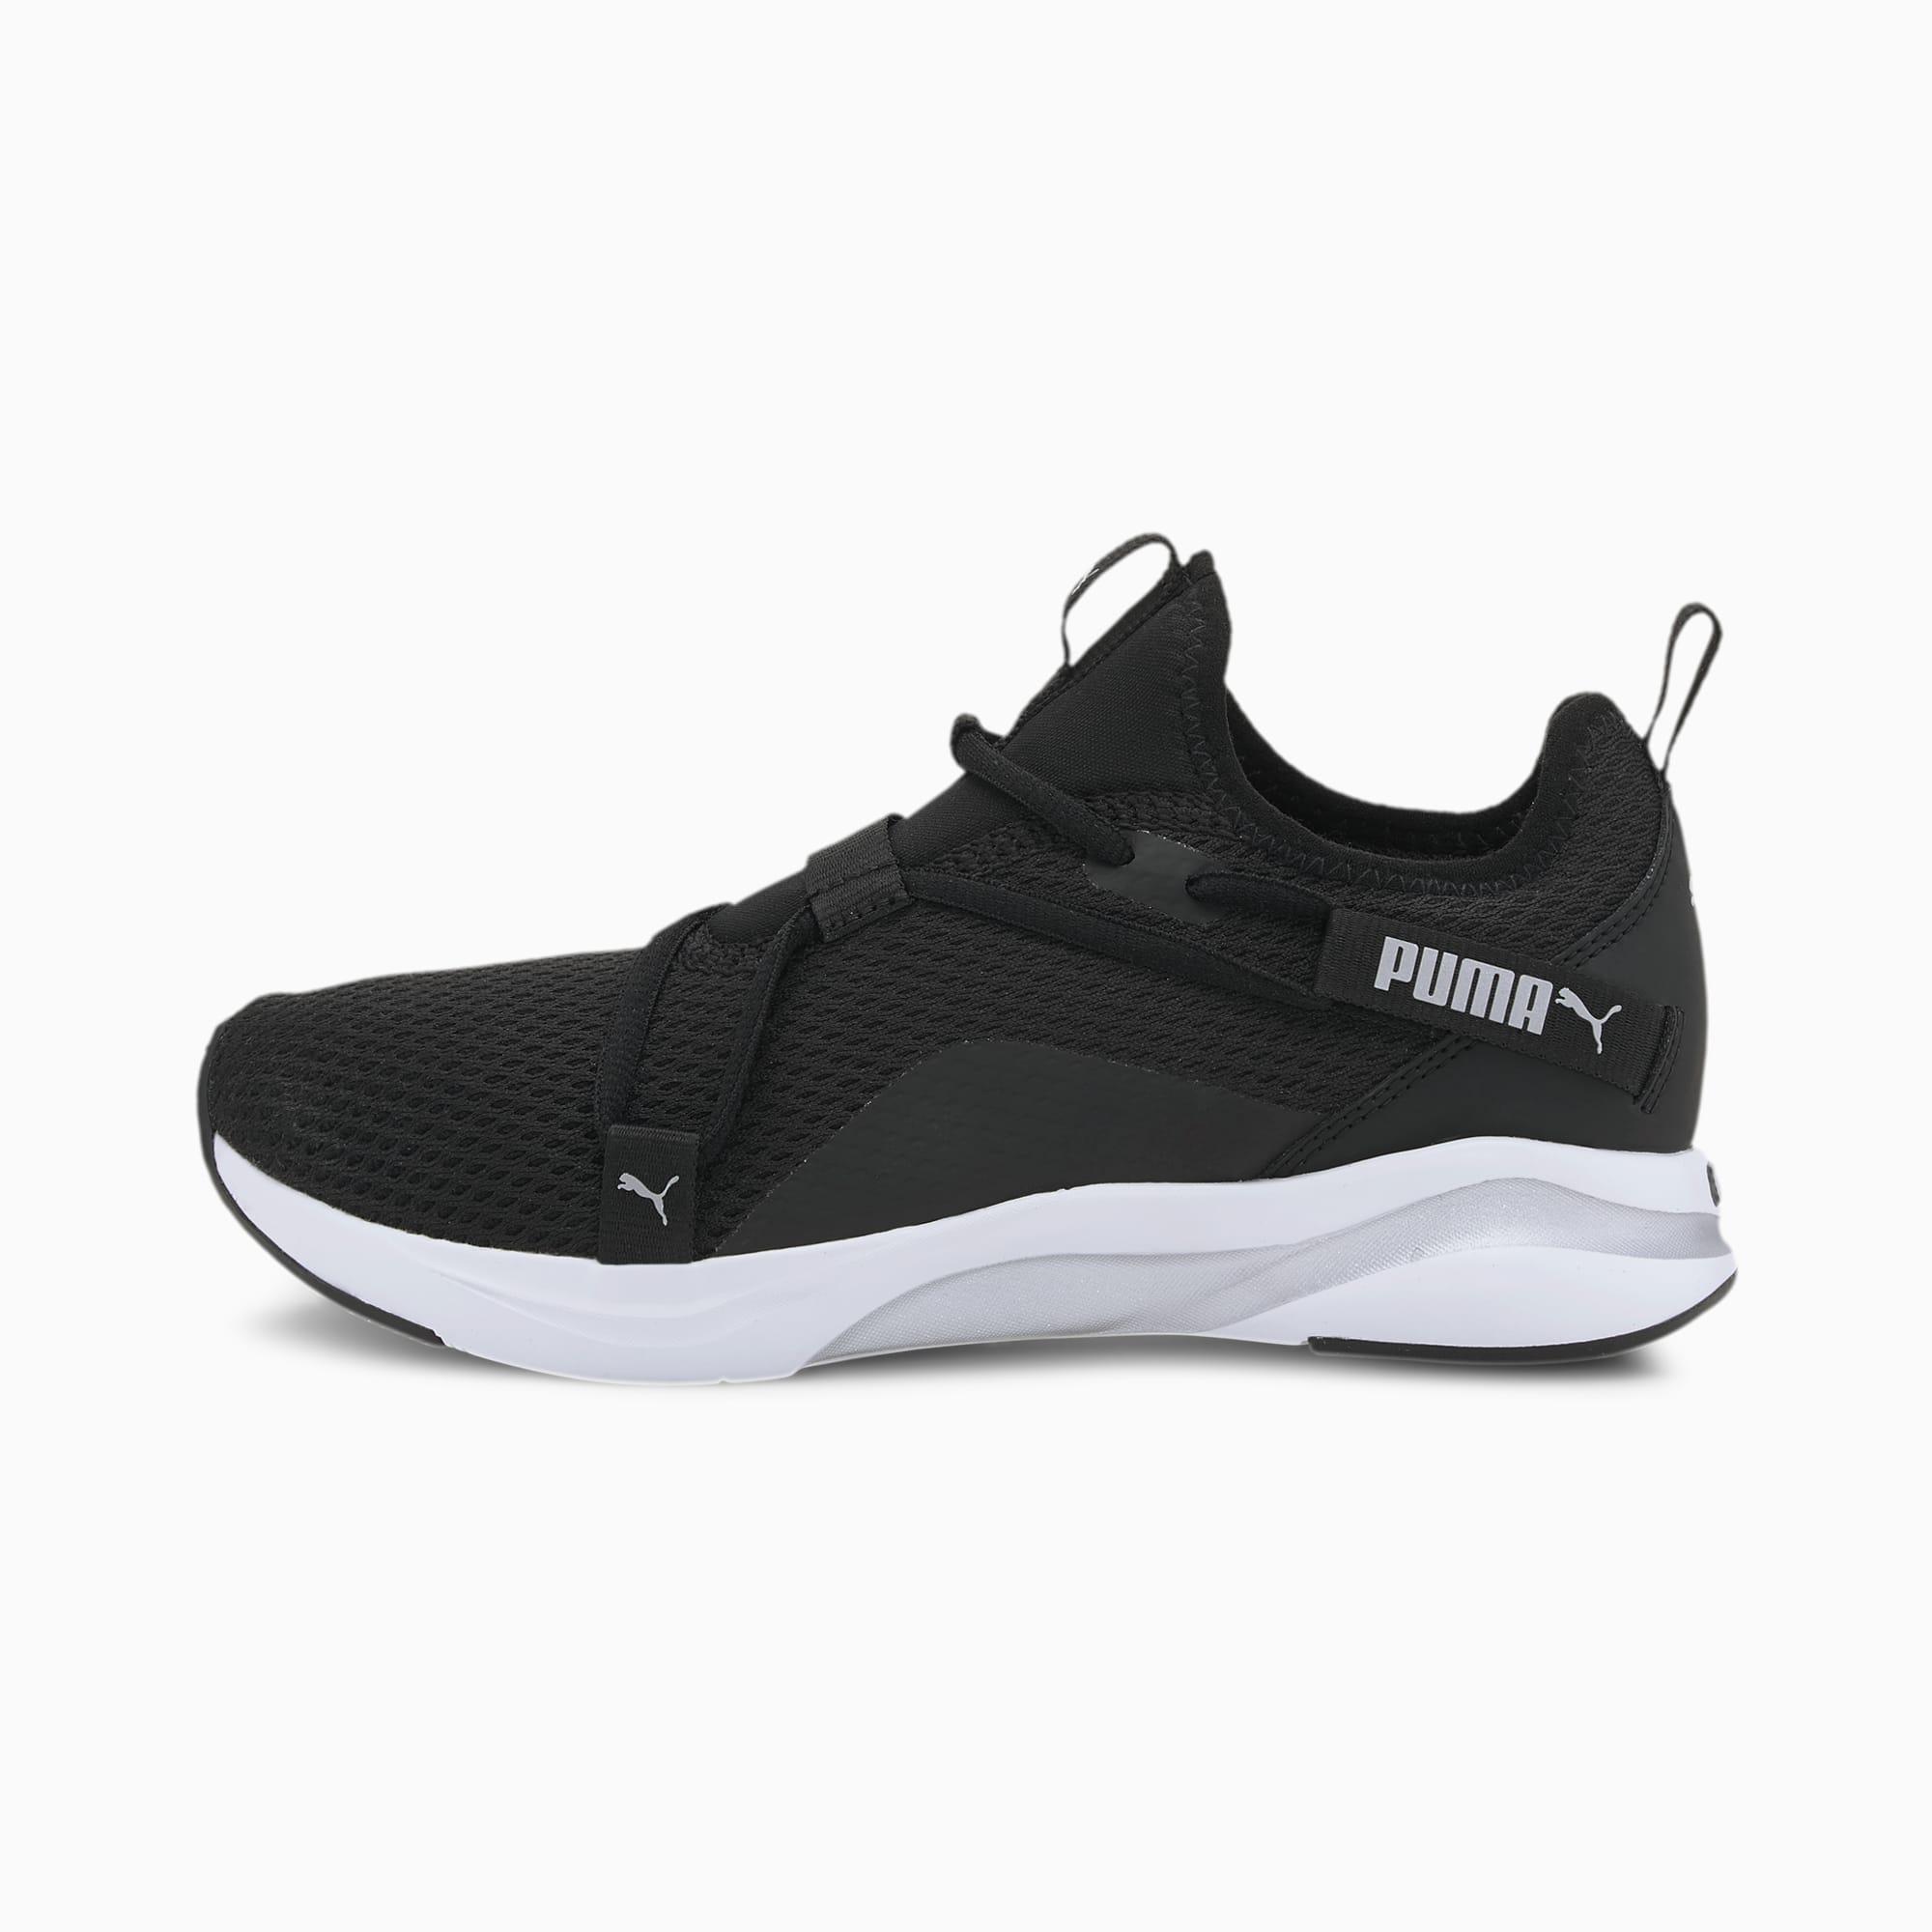 PUMA Rubber Softride Rift Slip On Shoes in Black - Lyst